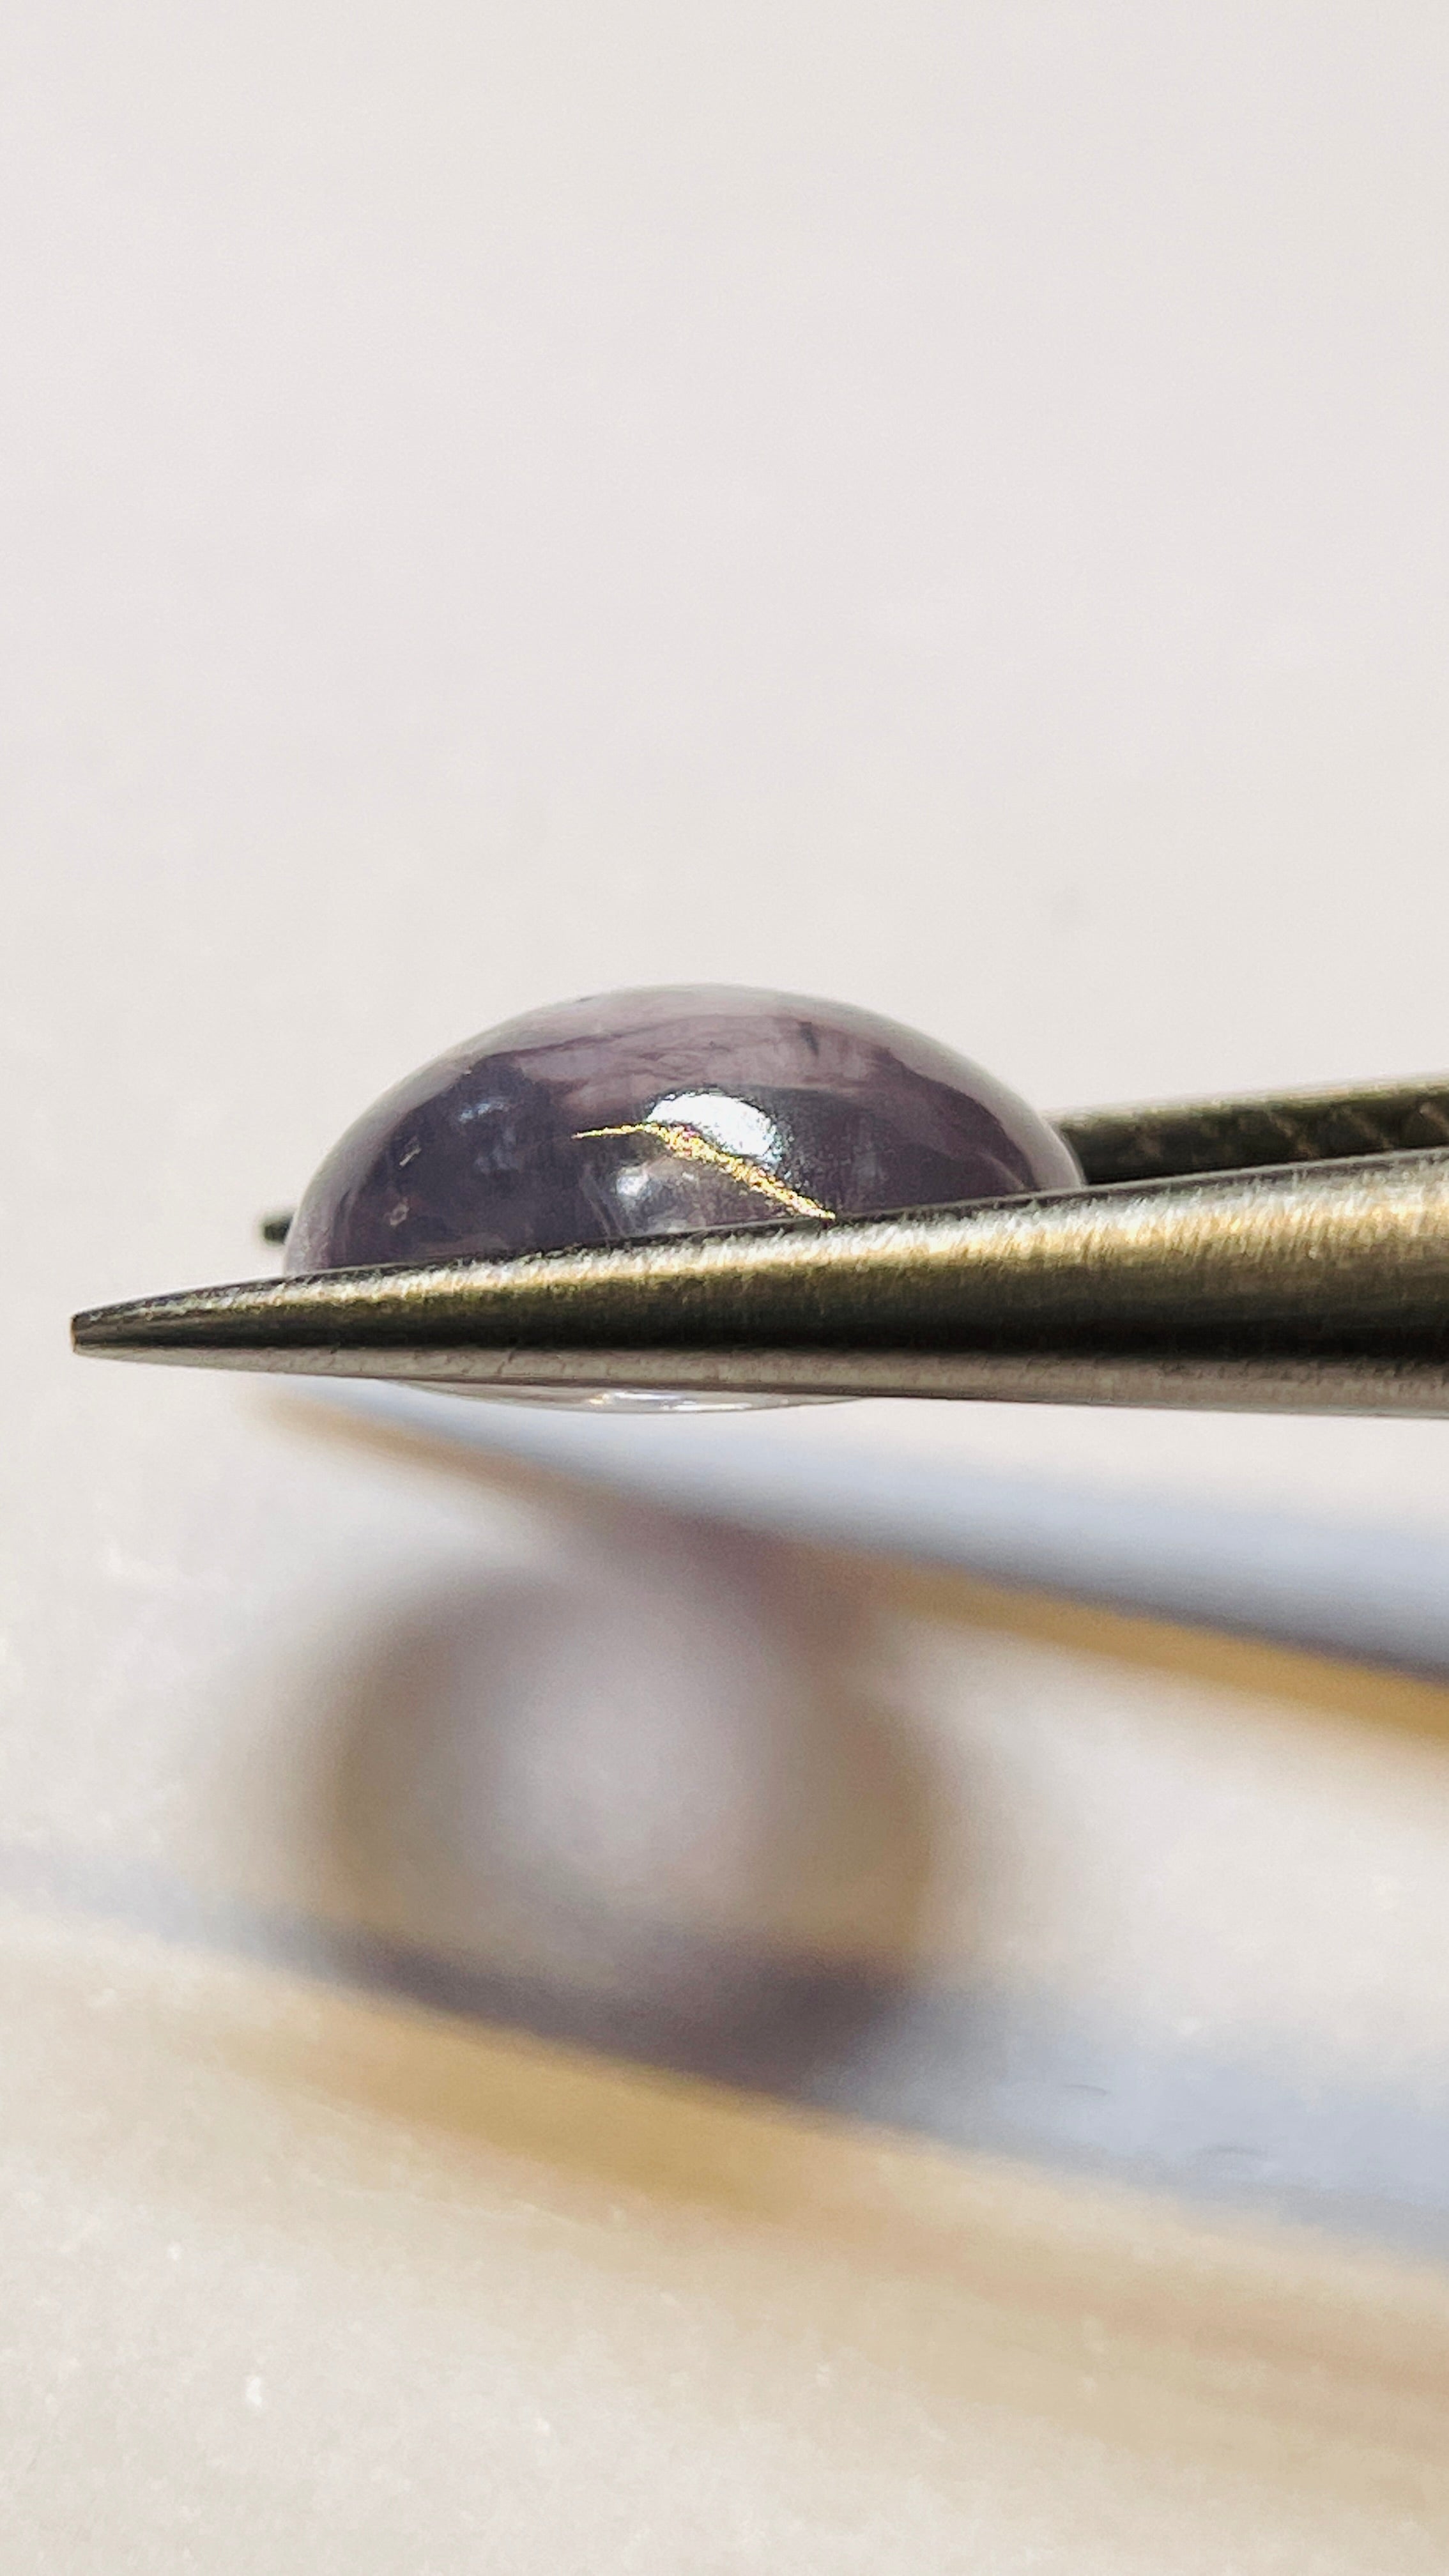 5.20Ct Colour Change / Shift Sapphire Cabochon Umba Valley Tanzania. Untreated Unheated.